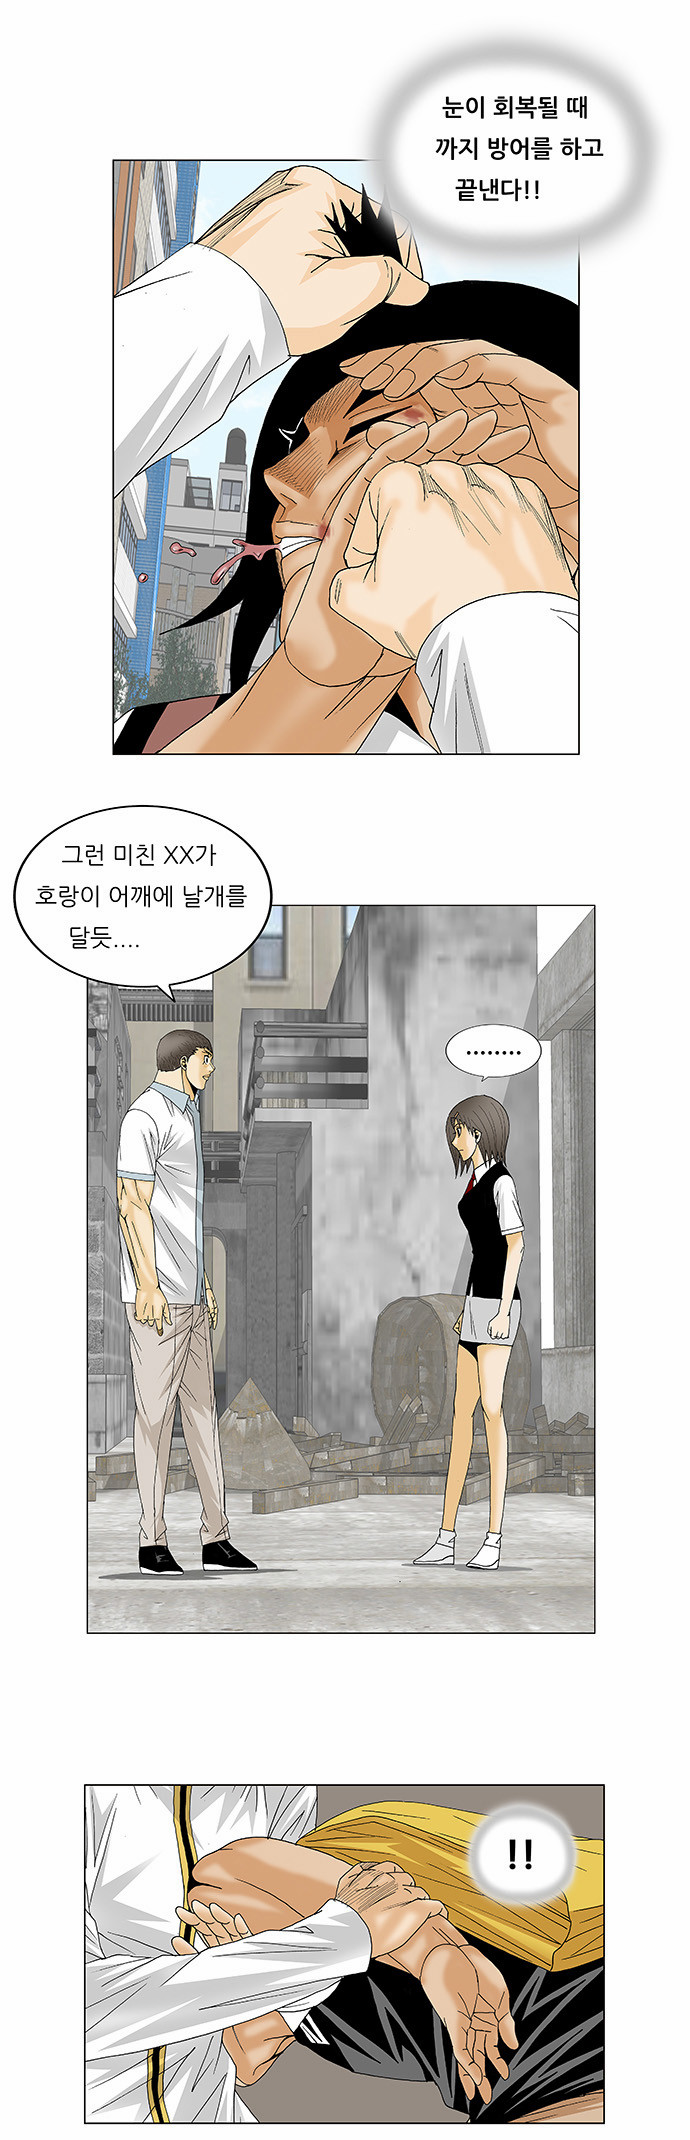 Ultimate Legend - Kang Hae Hyo - Chapter 127 - Page 27